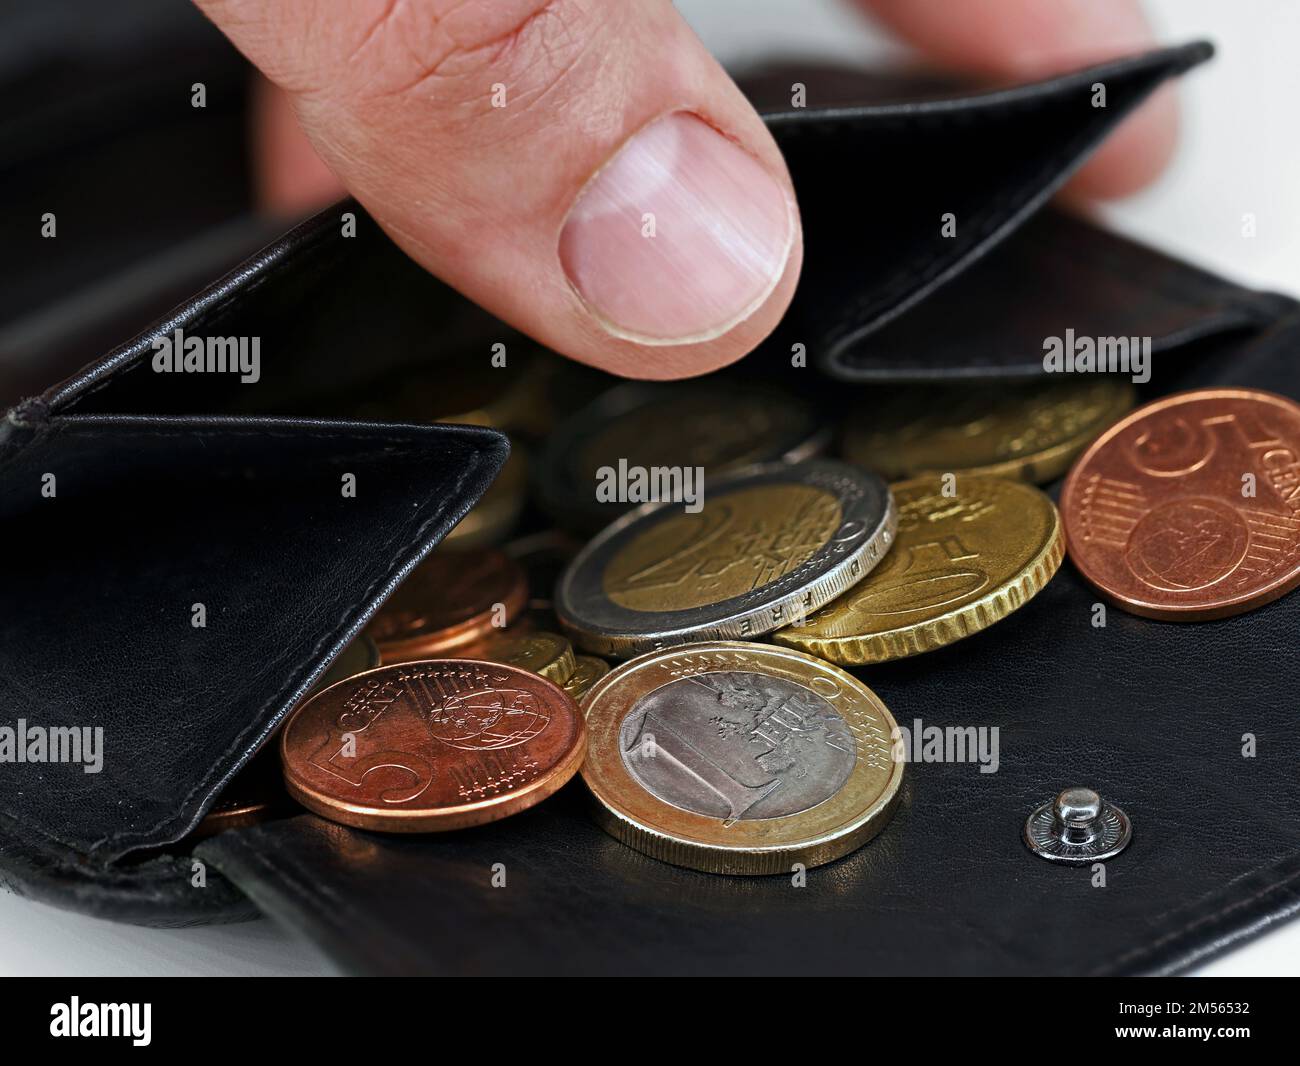 Male hand checking black leather wallet with euro coins, close-up of a open purse with loose change Stock Photo